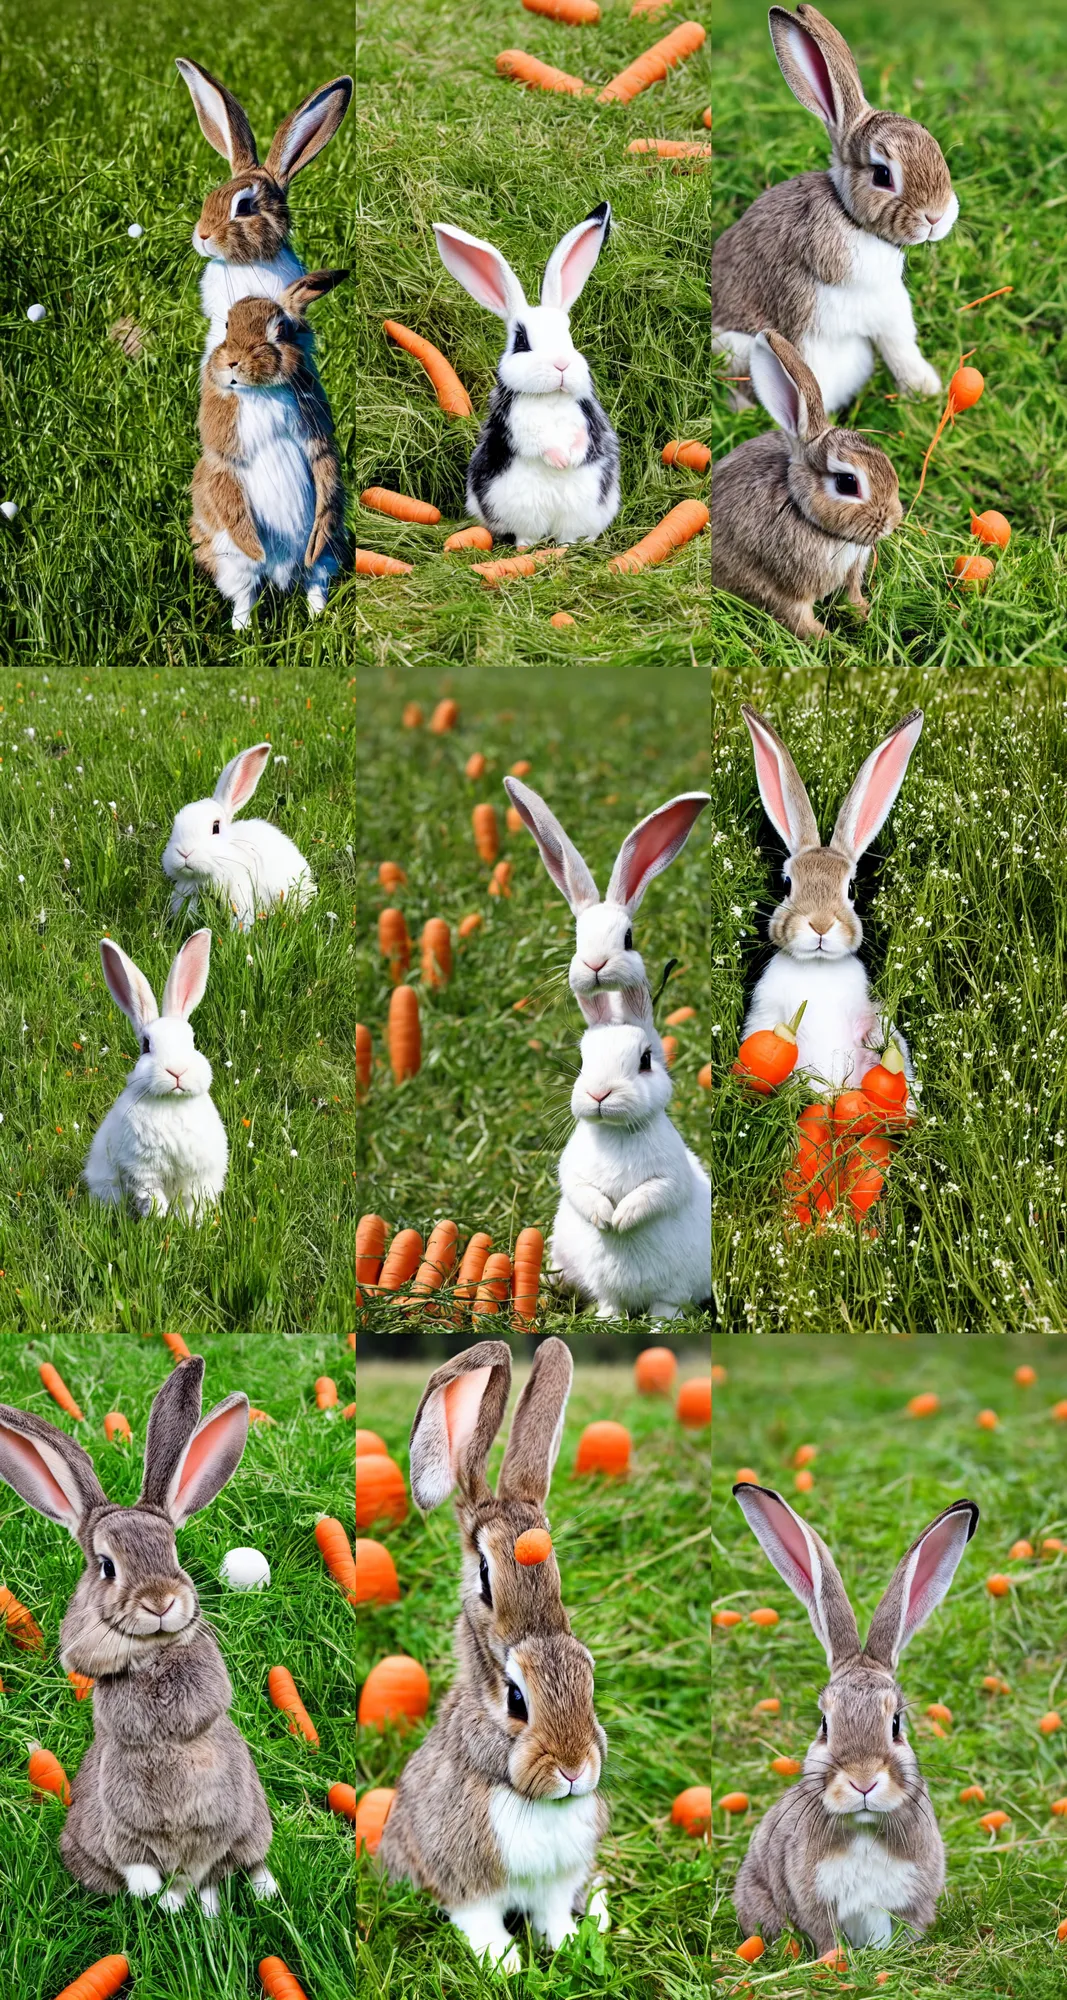 Prompt: bunny with floppy ears in a grassy field surrounded by carrots, white and black spots, happy, photo